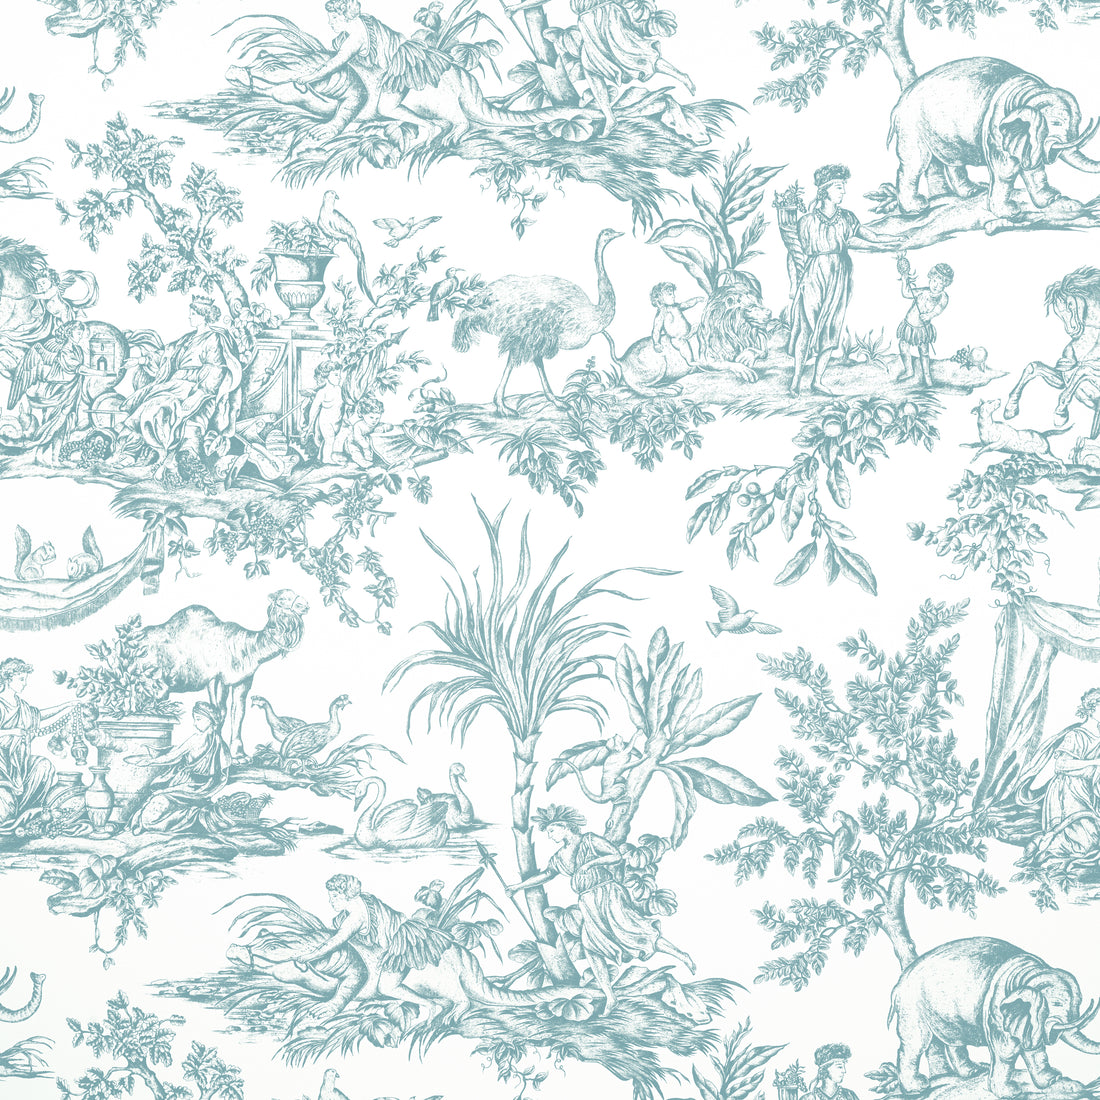 Antilles Toile fabric in spa blue color - pattern number AF15170 - by Anna French in the Antilles collection